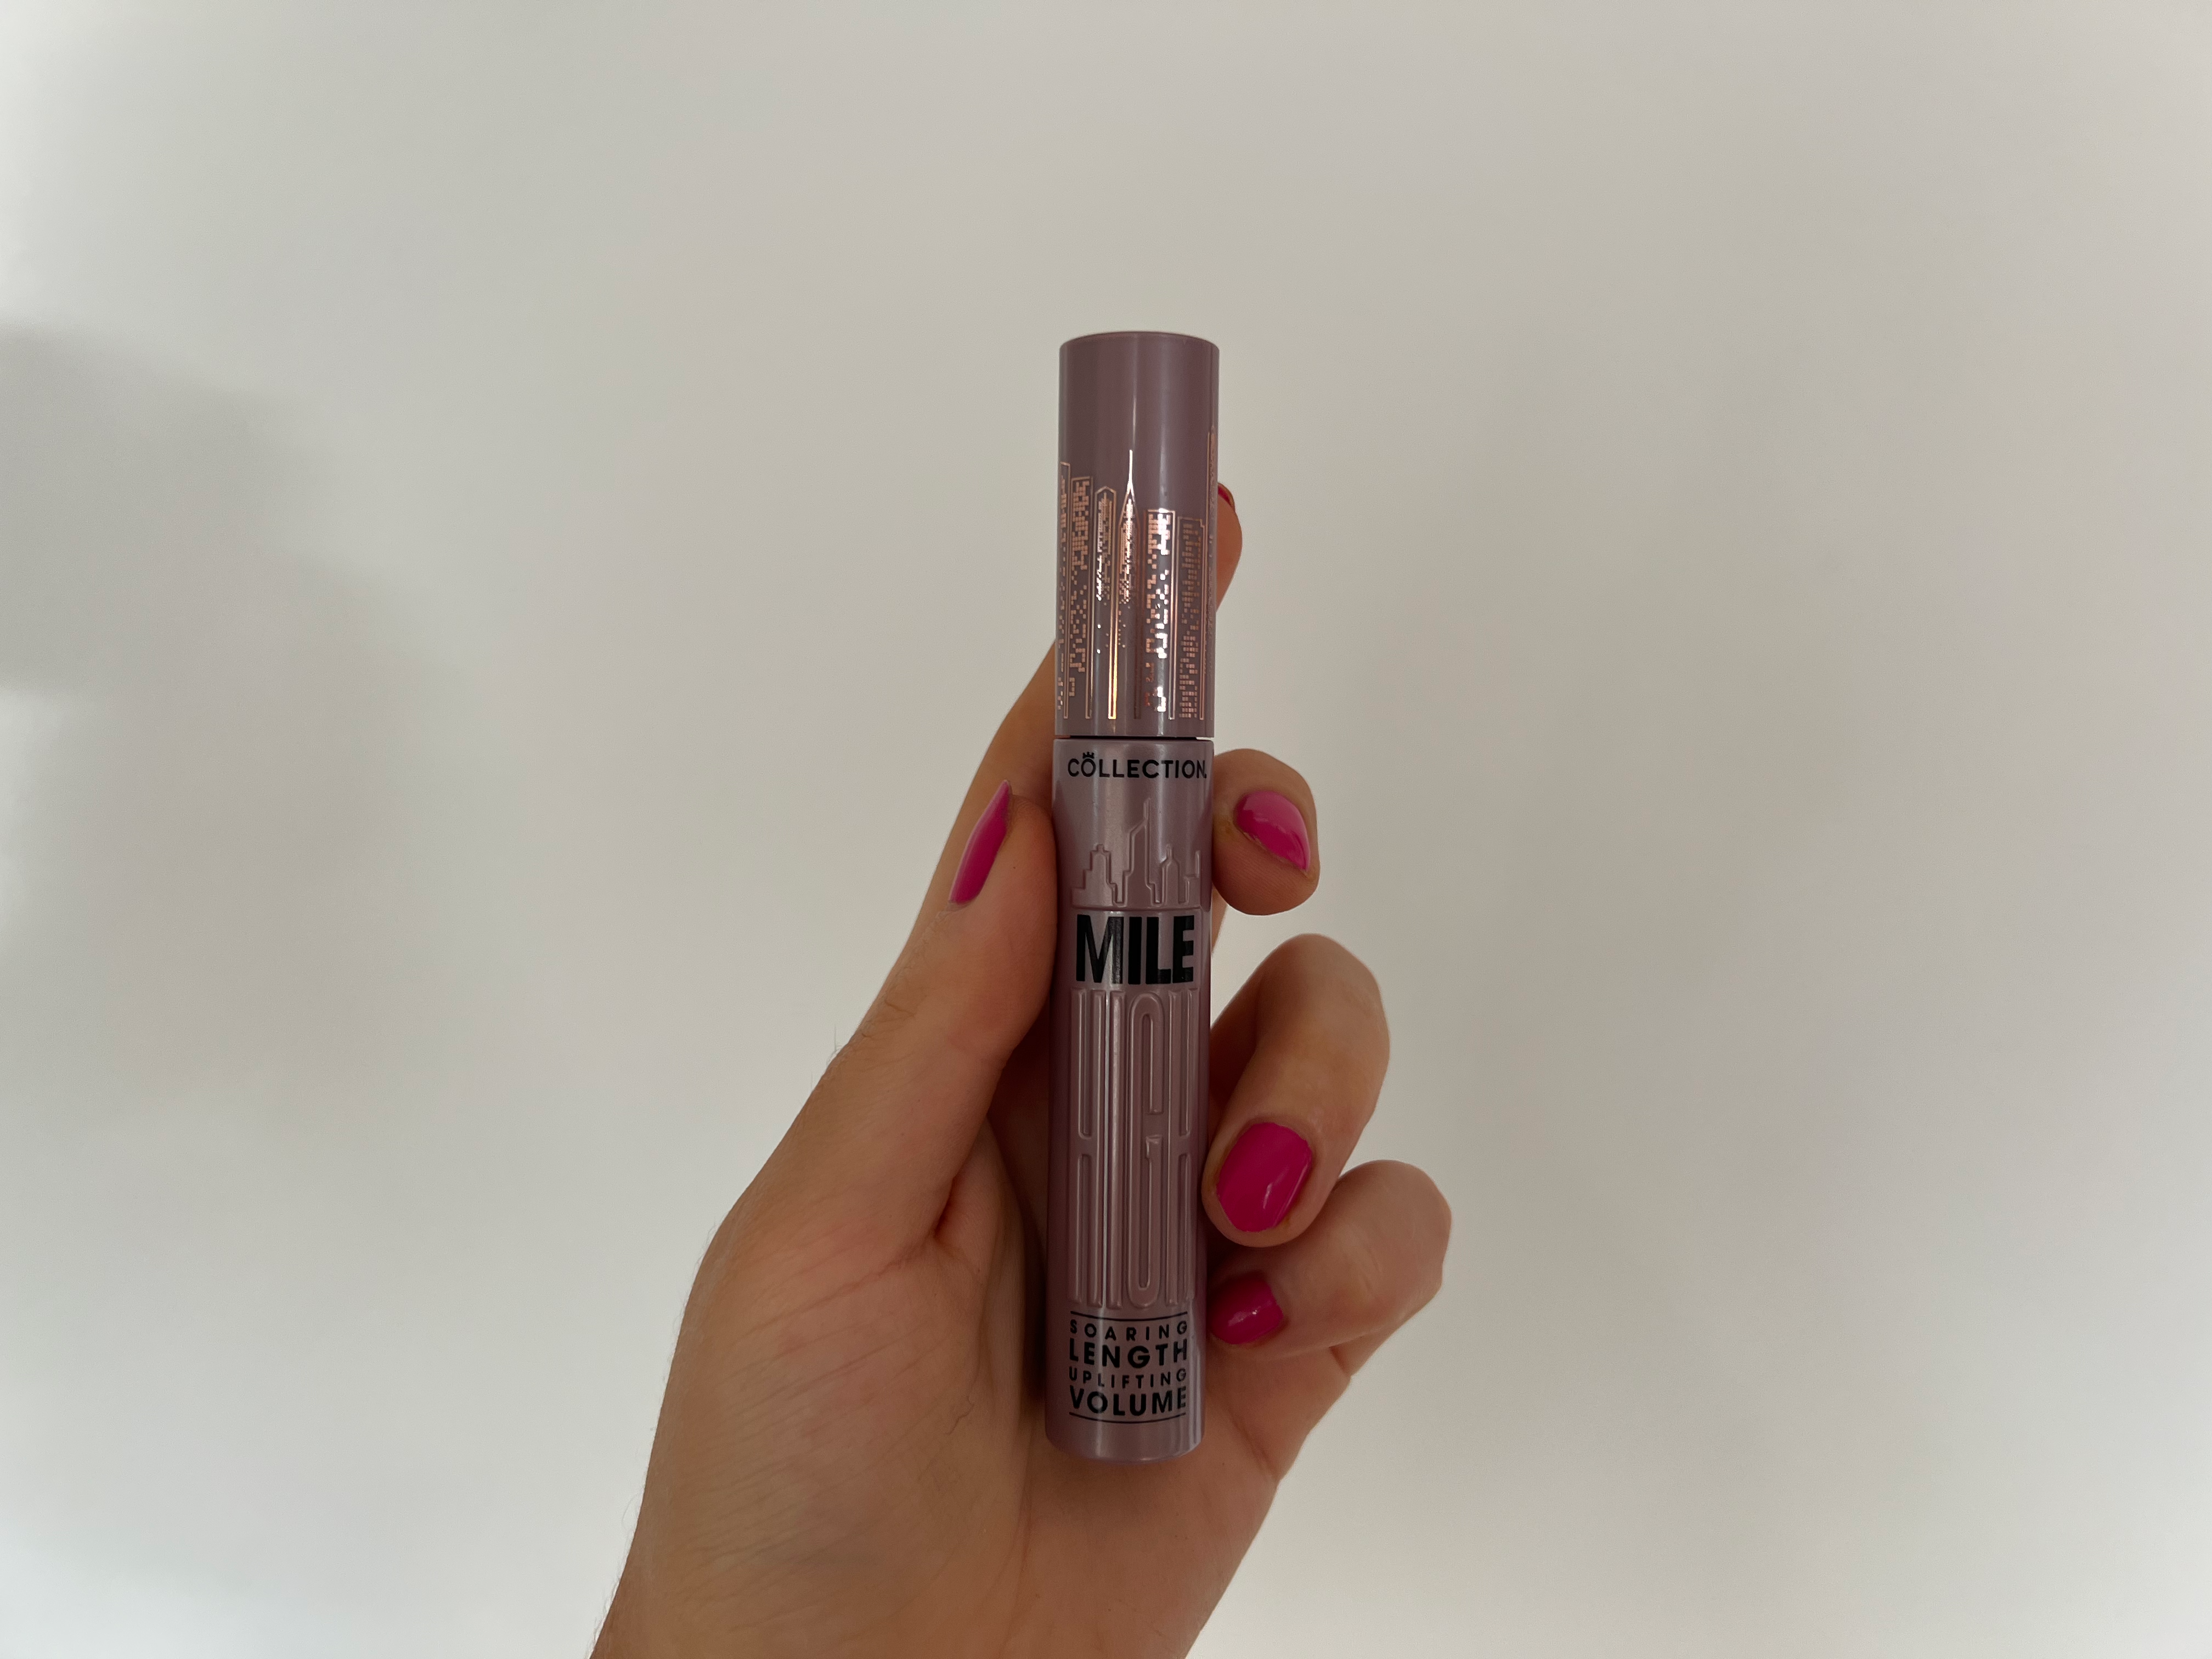 Collection Cosmetics mile high mascara review